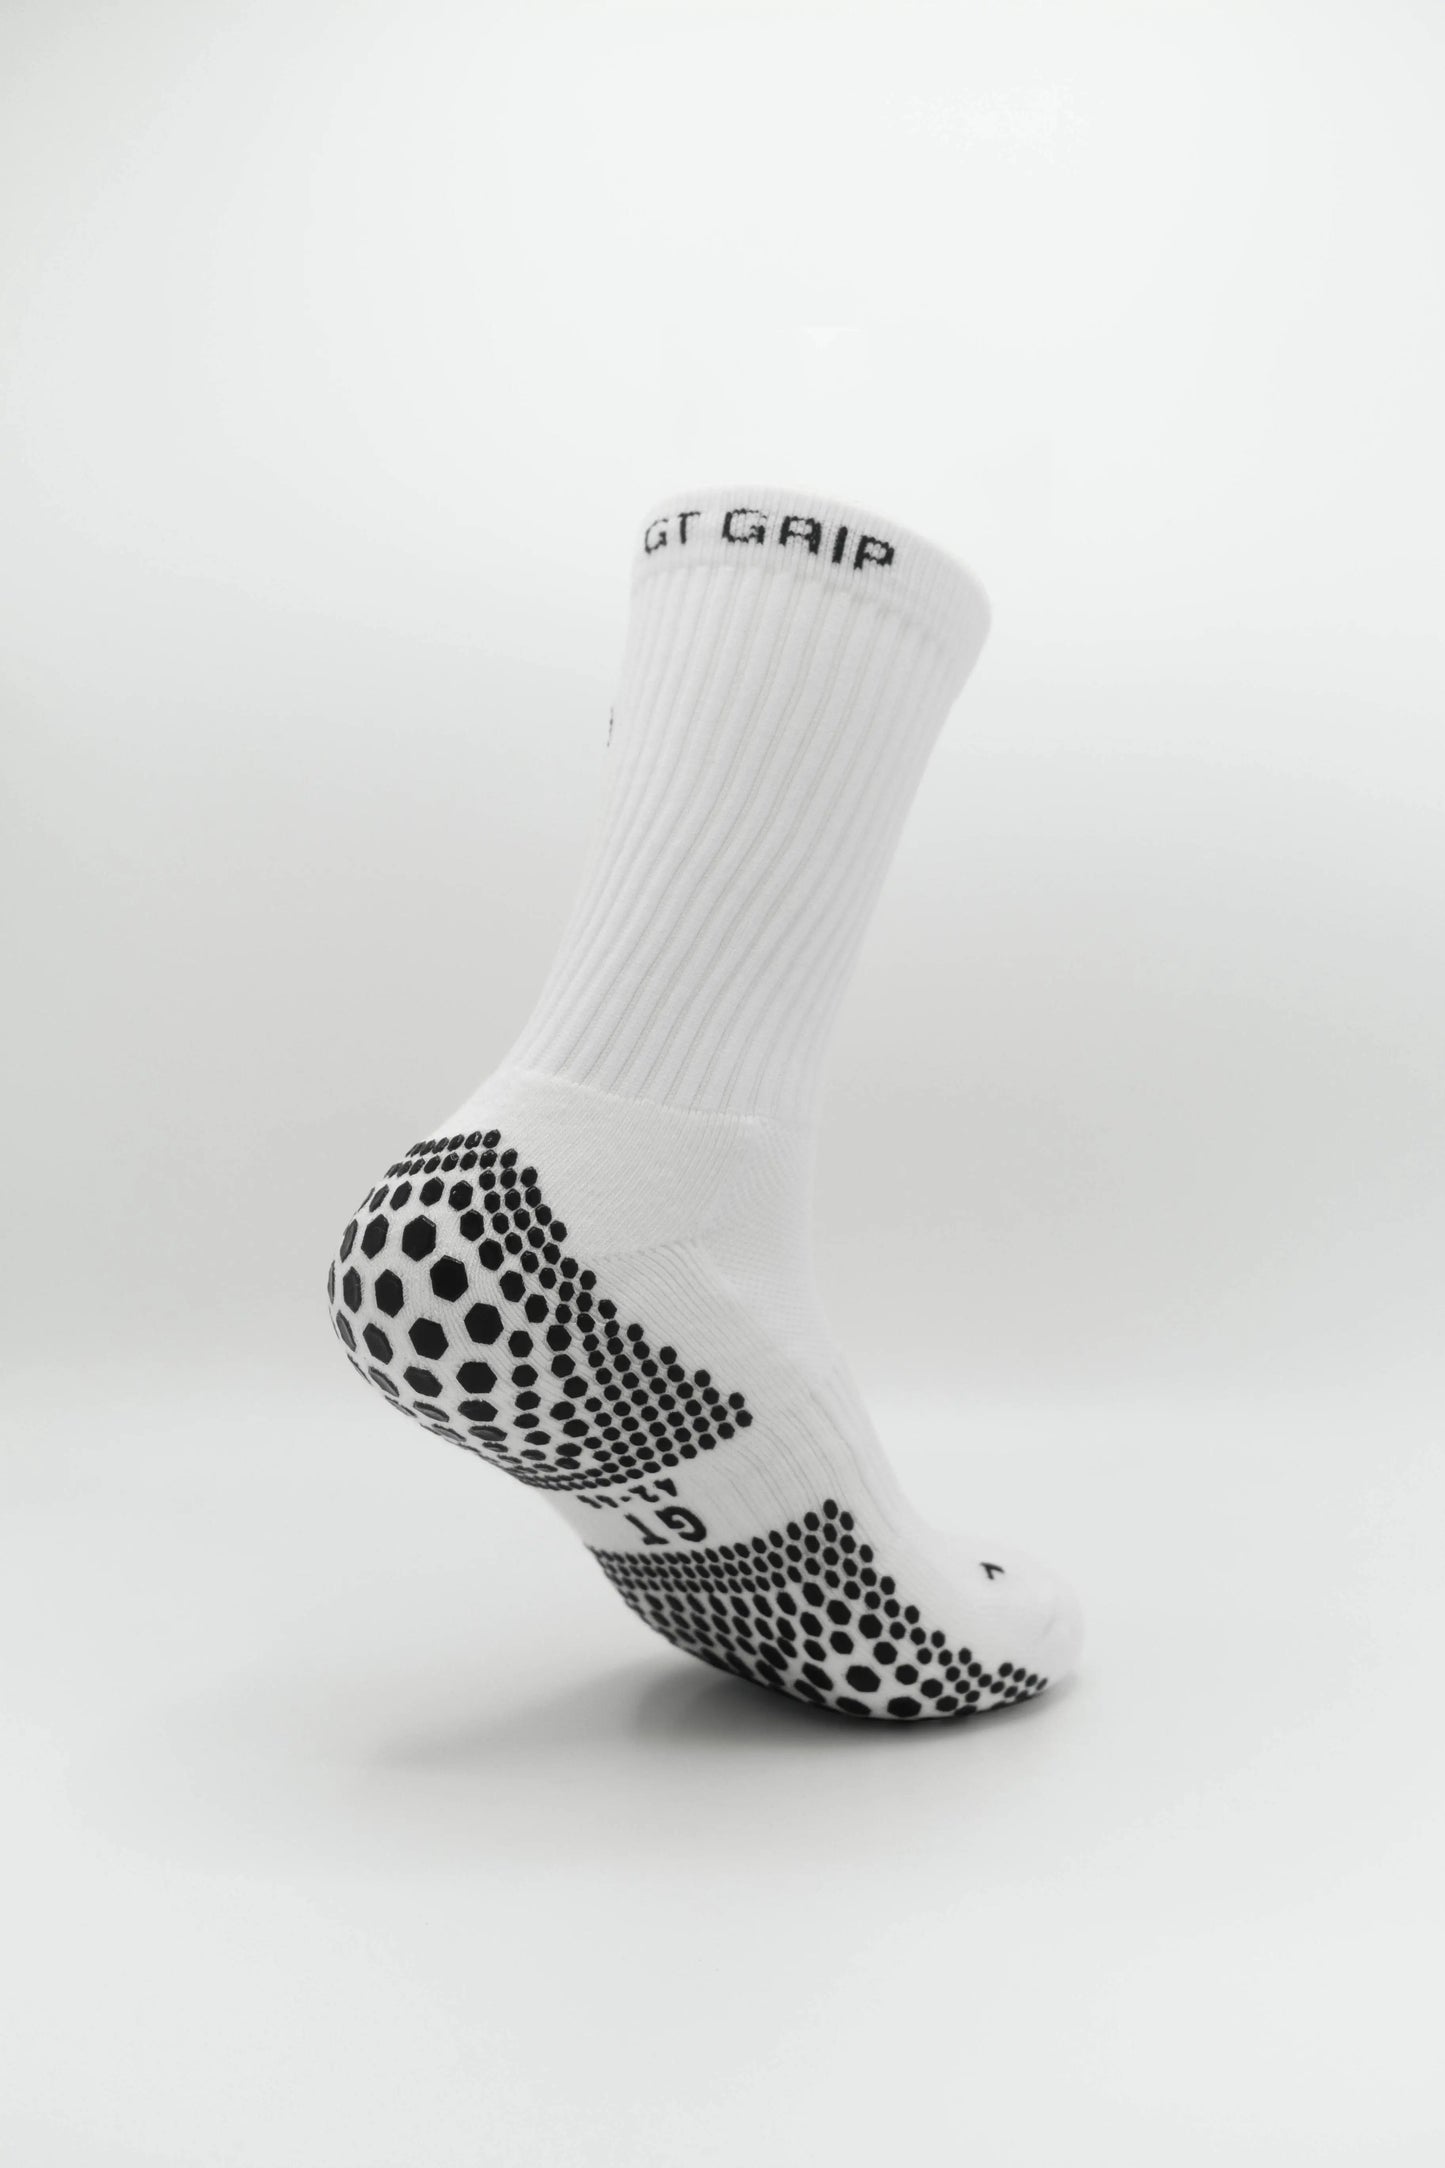 White football GRIP Socks Crew - Right Back View, Ideal for Soccer, Basketball, Padel, Tennis - Featuring Heel Grip